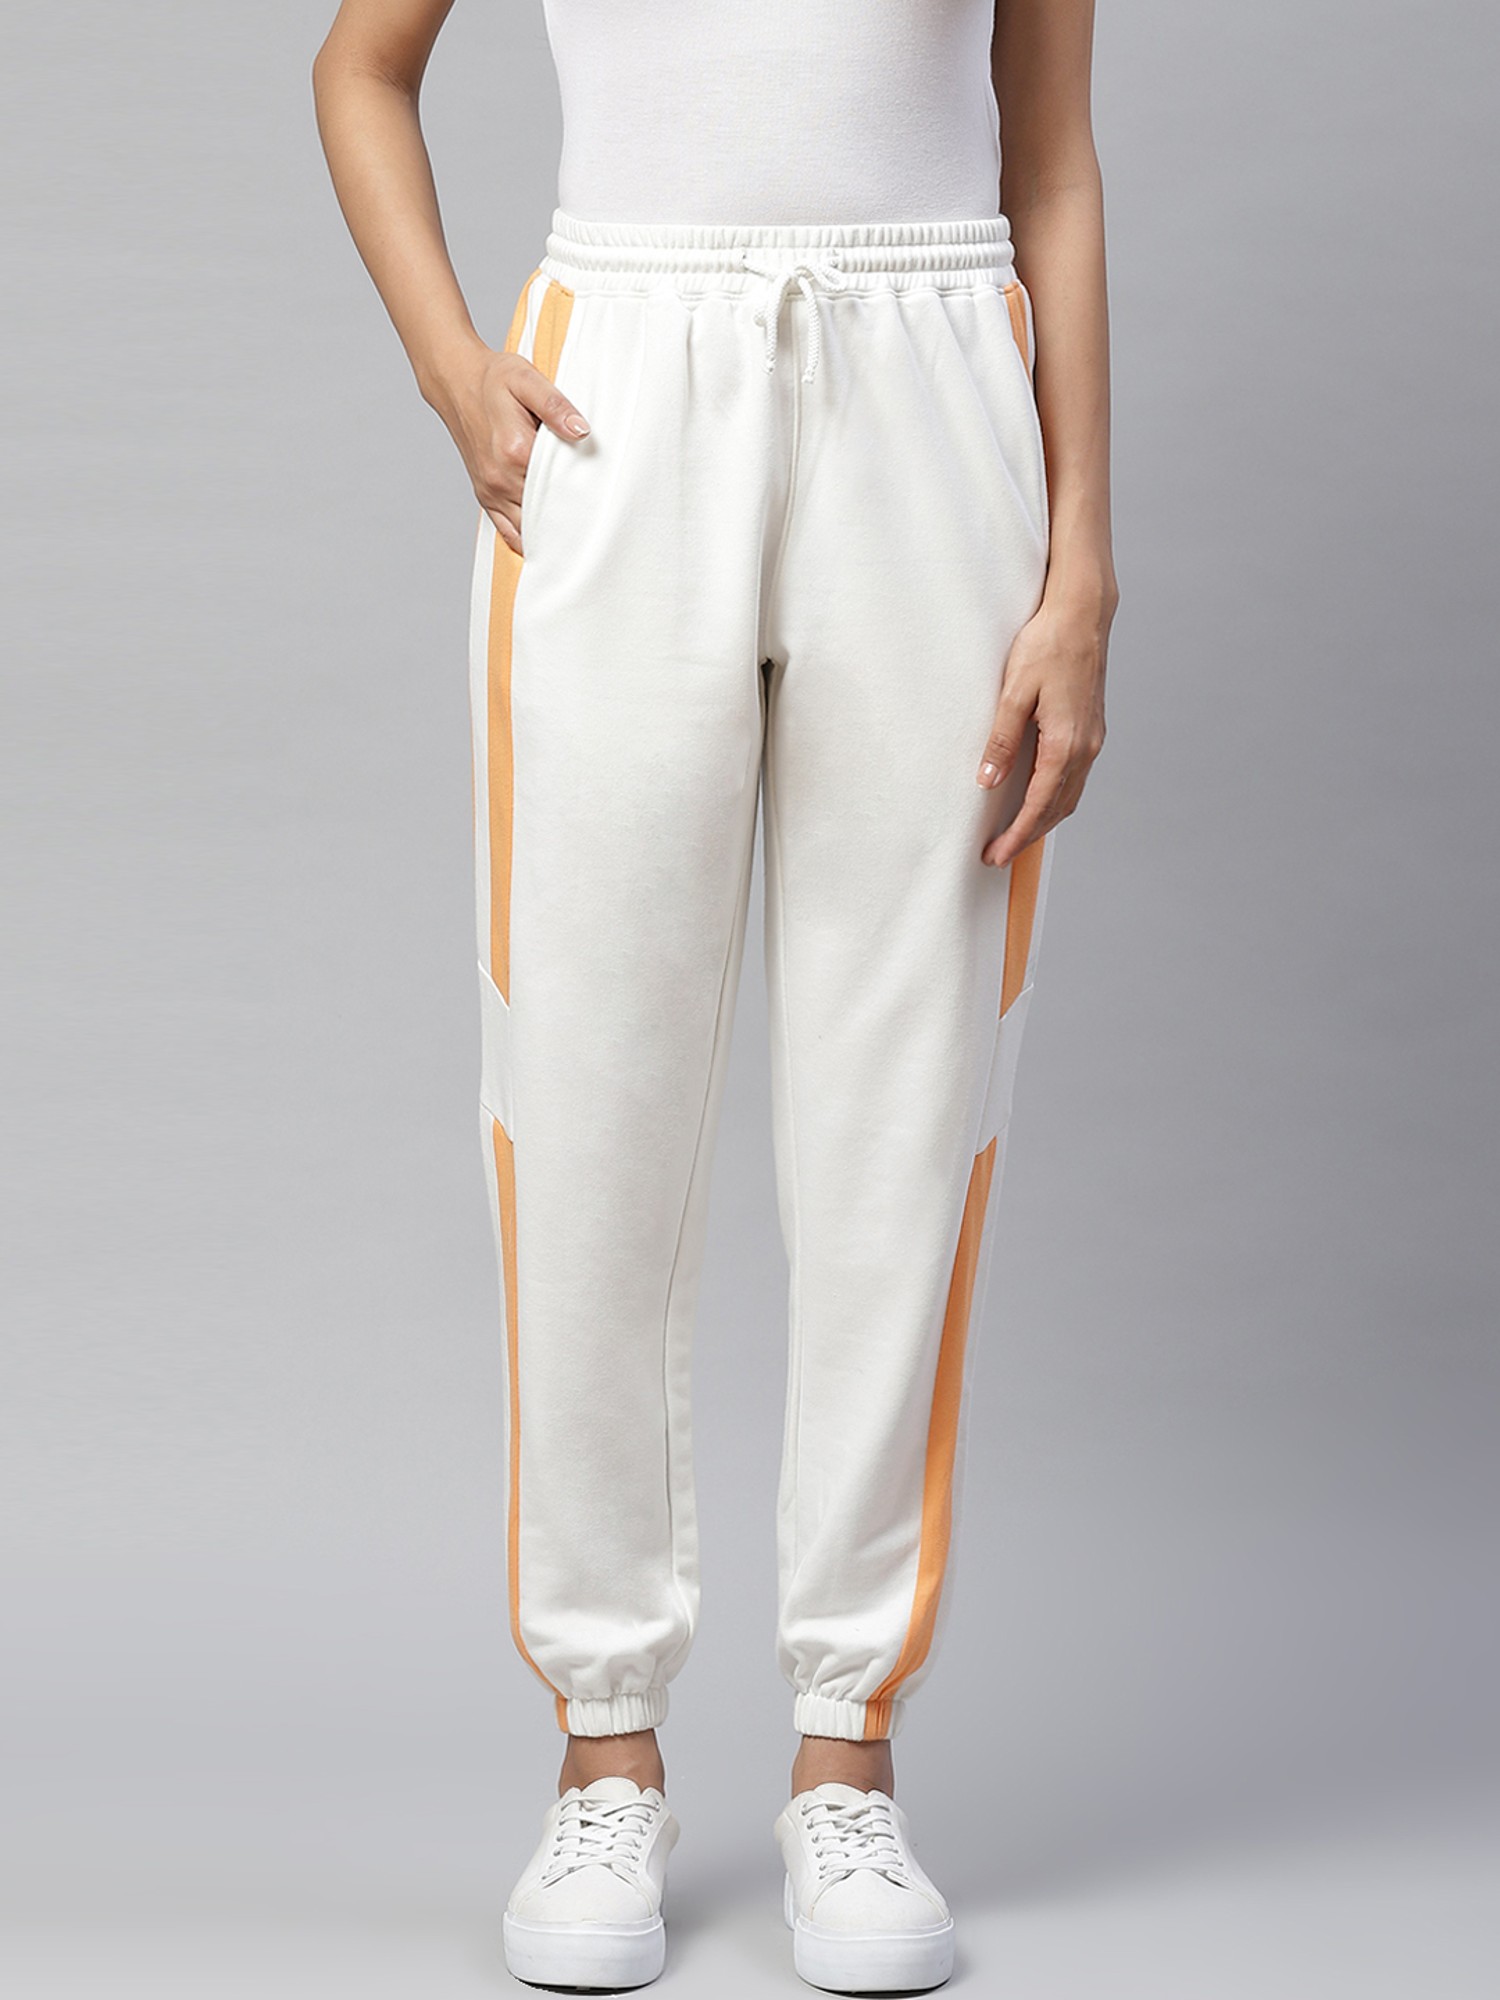 Buy GLOBAL DESI Off White Womens ALine Applique Solid Casual Wear Trousers   Shoppers Stop